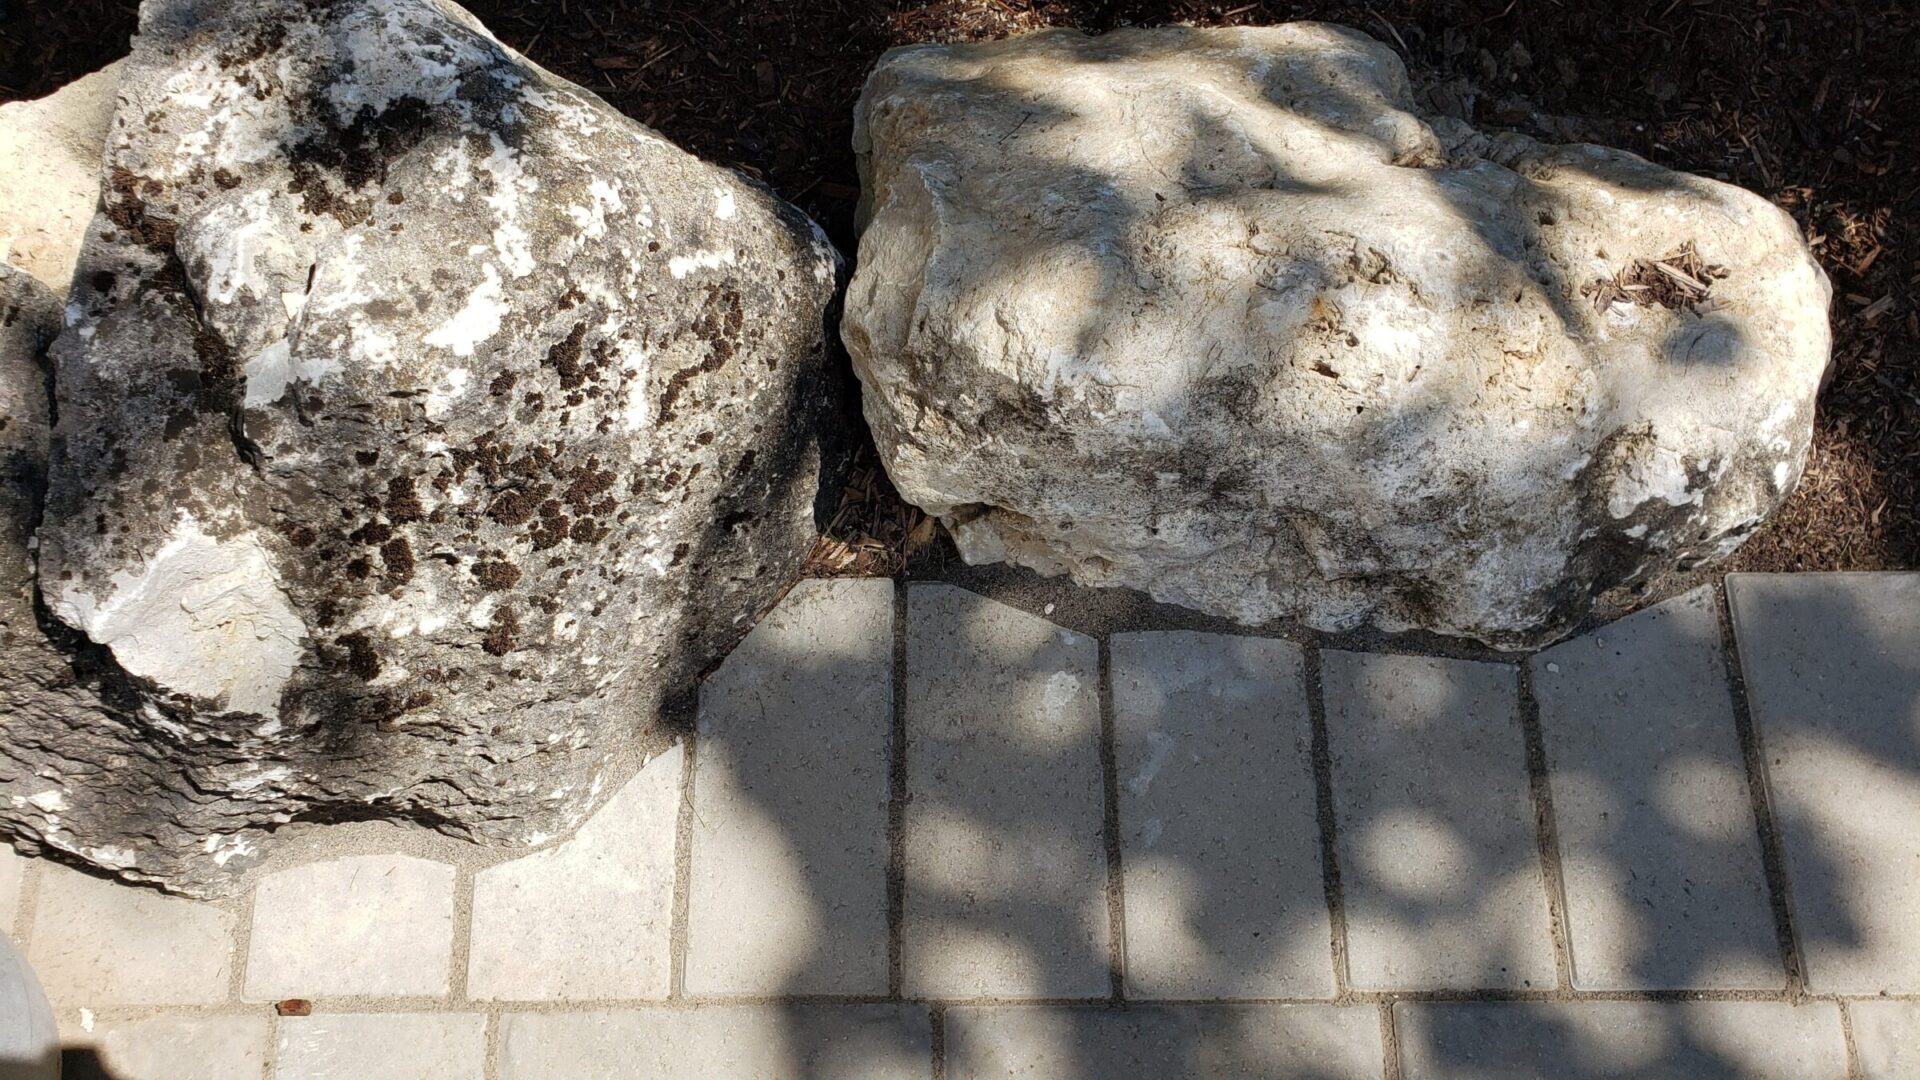 Two large, textured rocks sit adjacent to a paved sidewalk with rectangular tiles, casting shadows in bright sunlight, with mulch visible in the background.